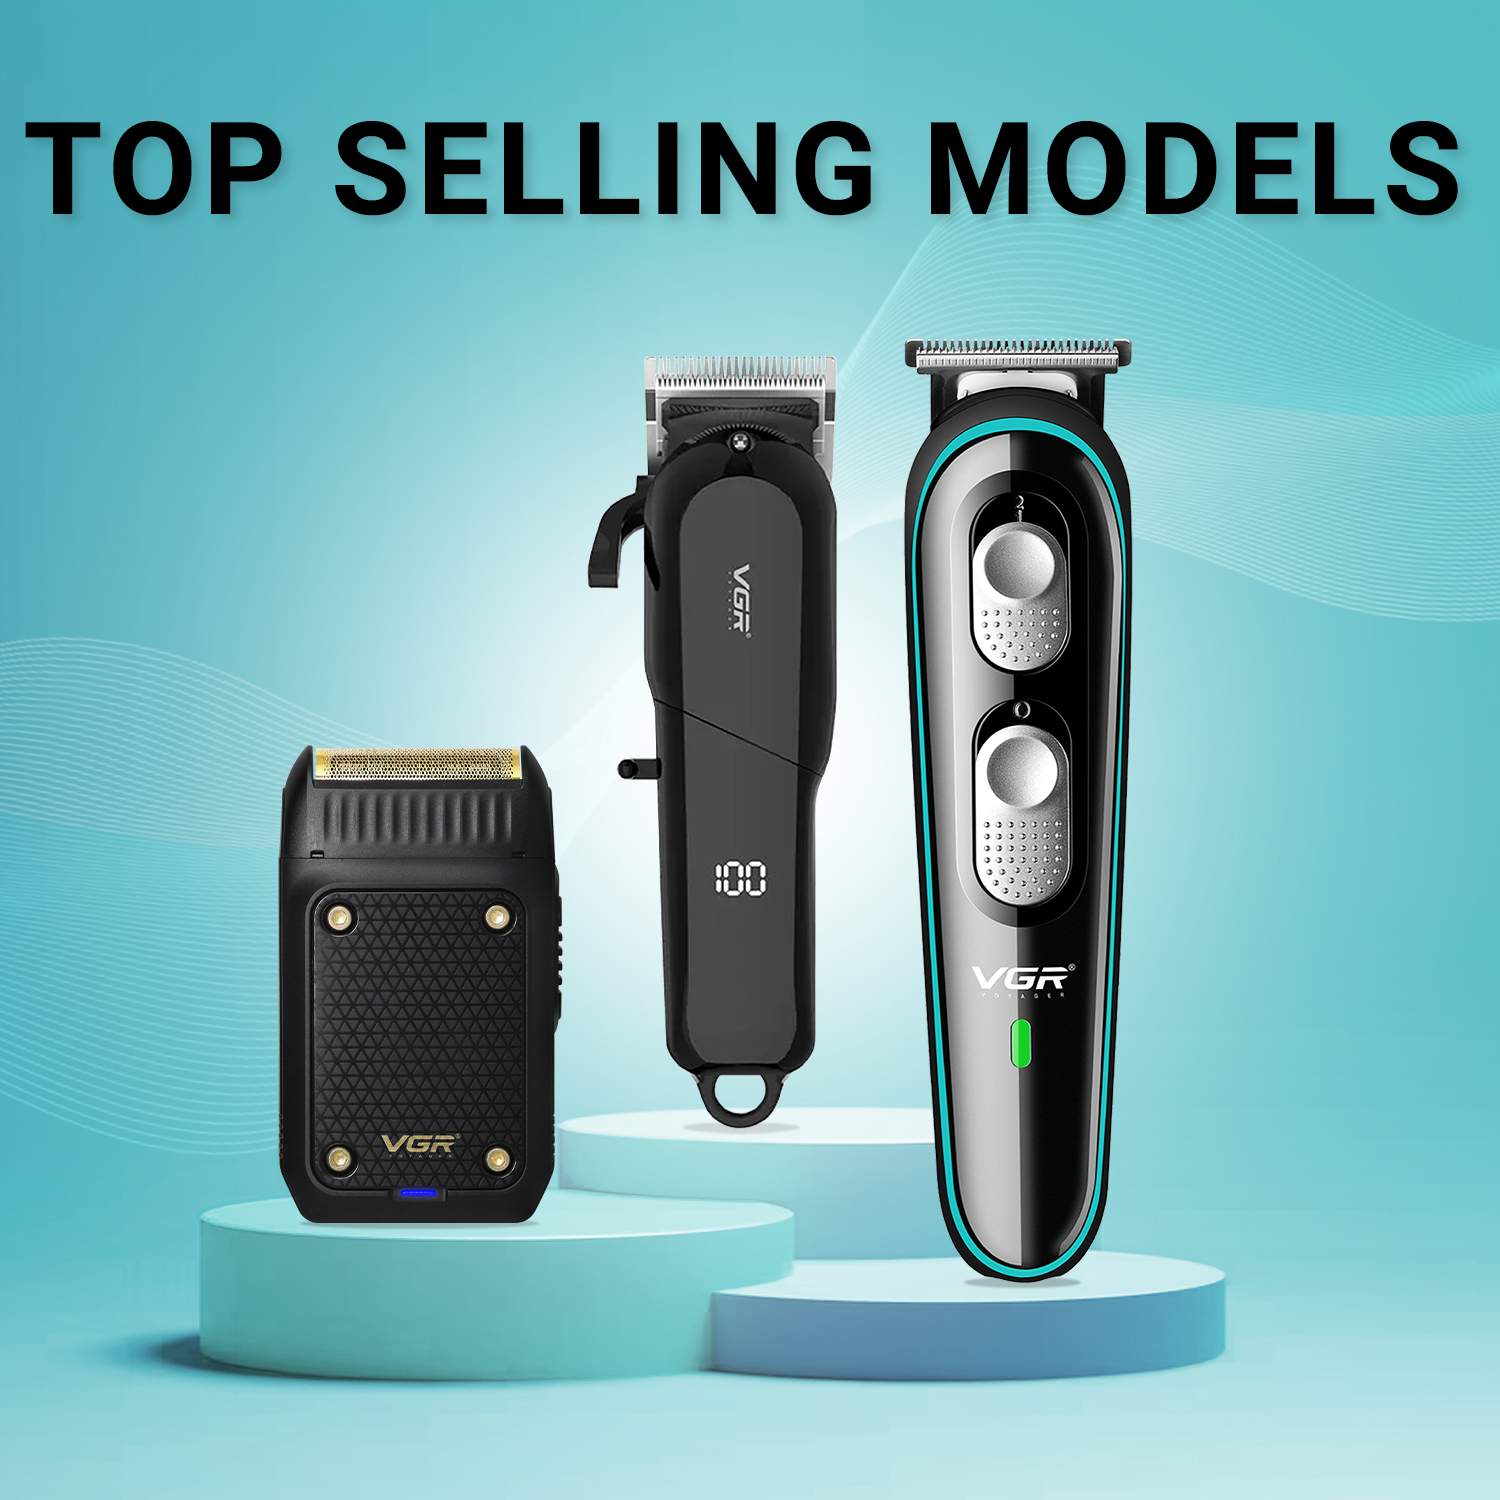 Top Selling Models - VGR Official India